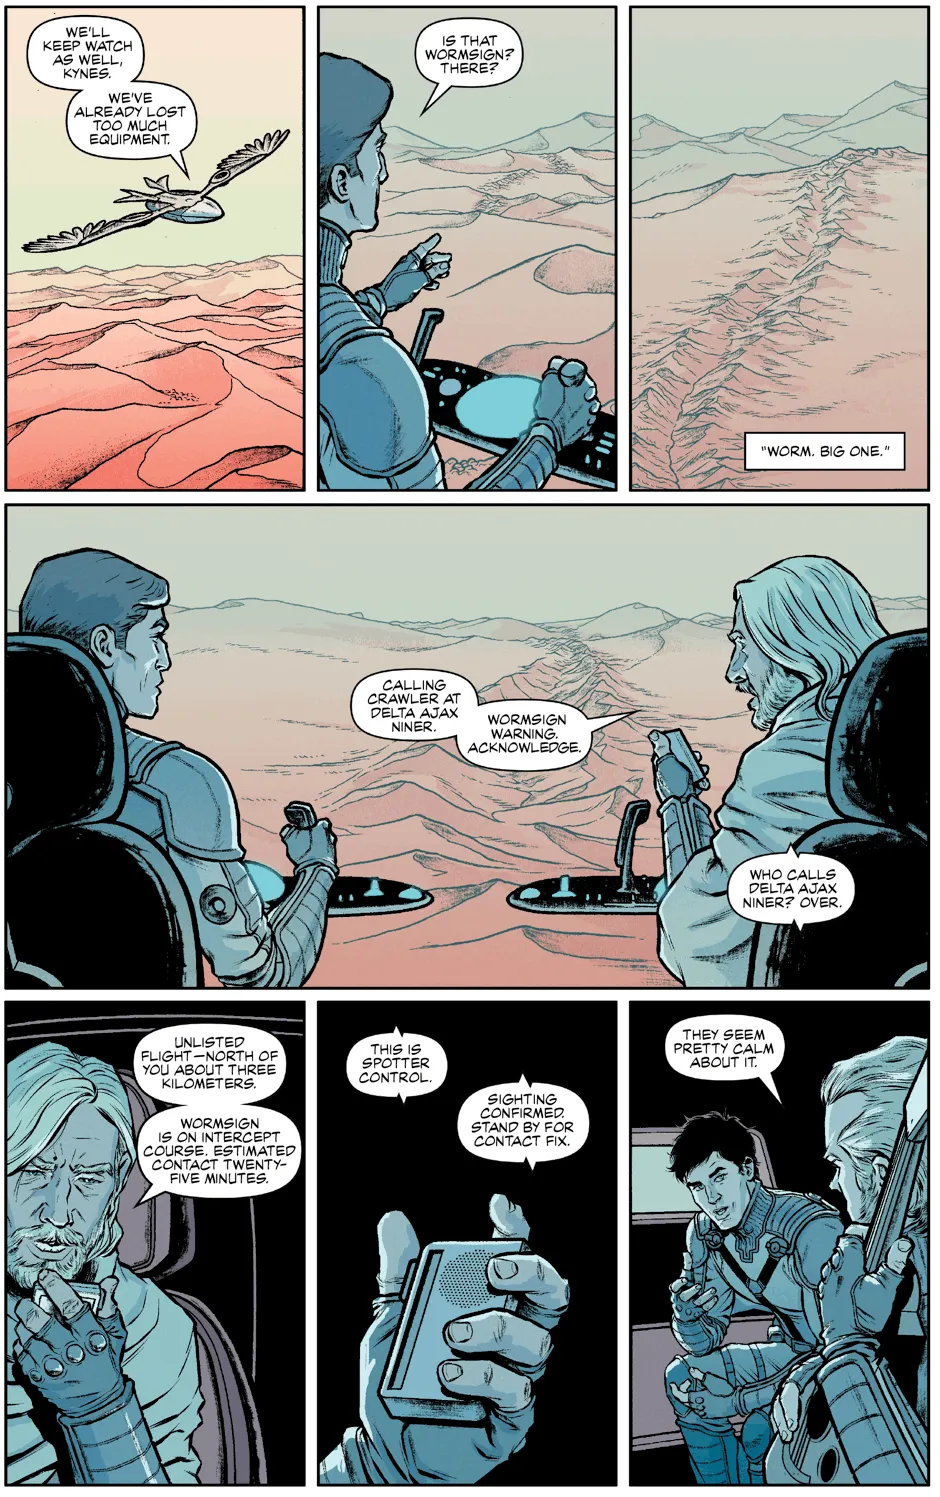 Page 79 of Dune: The Graphic Novel, adapted by Brian Herbert and Kevin J. Anderson, illustrated by Raúl Allen and Patricia Martín, published by Abrams ComicArts © 2020 Herbert Properties LLC